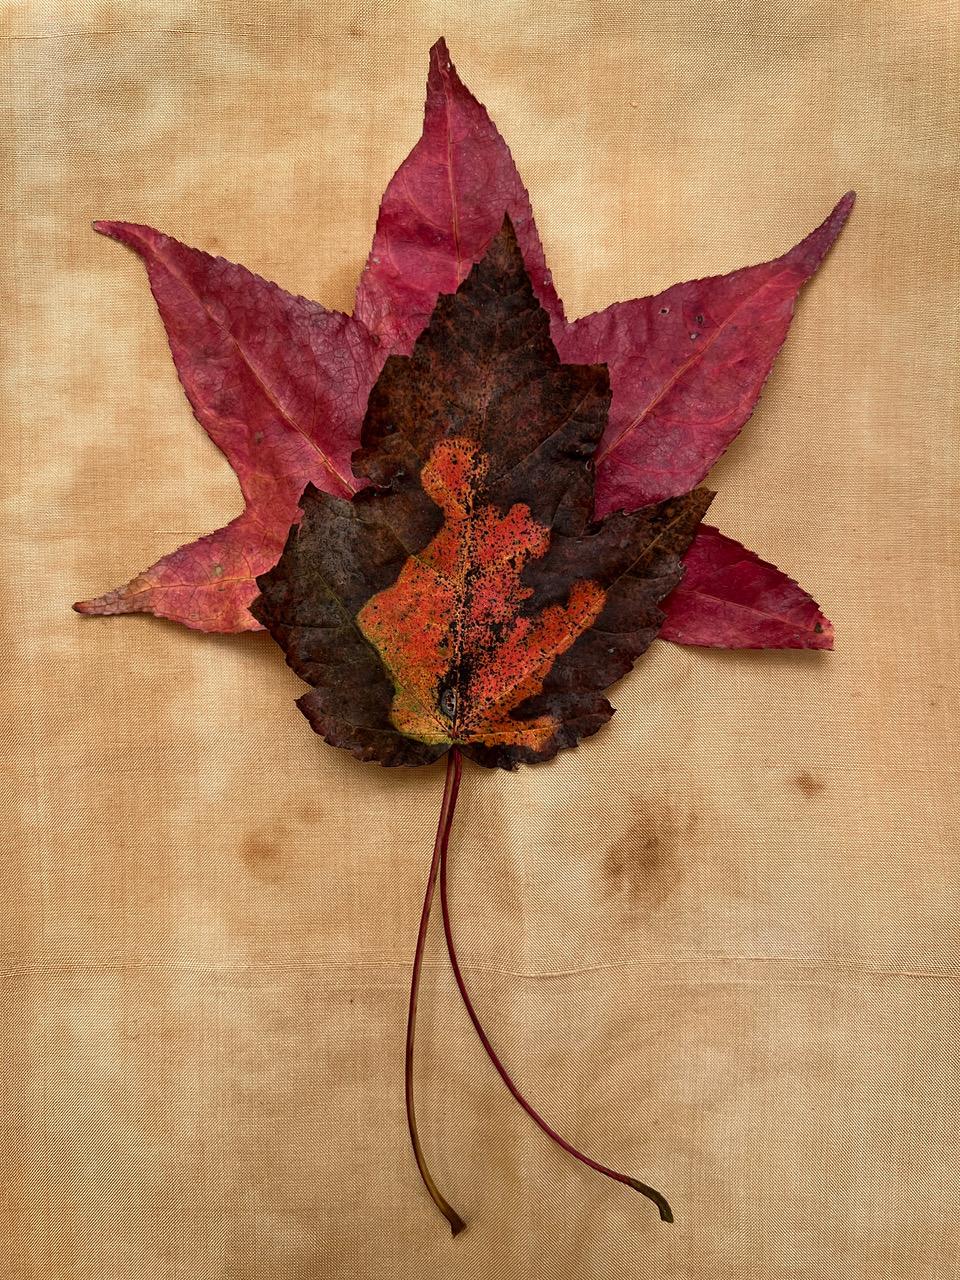 Paul Cava Color Photograph - Untitled #3440 from "Leaves" series: nature still-life leaf photograph w/ red